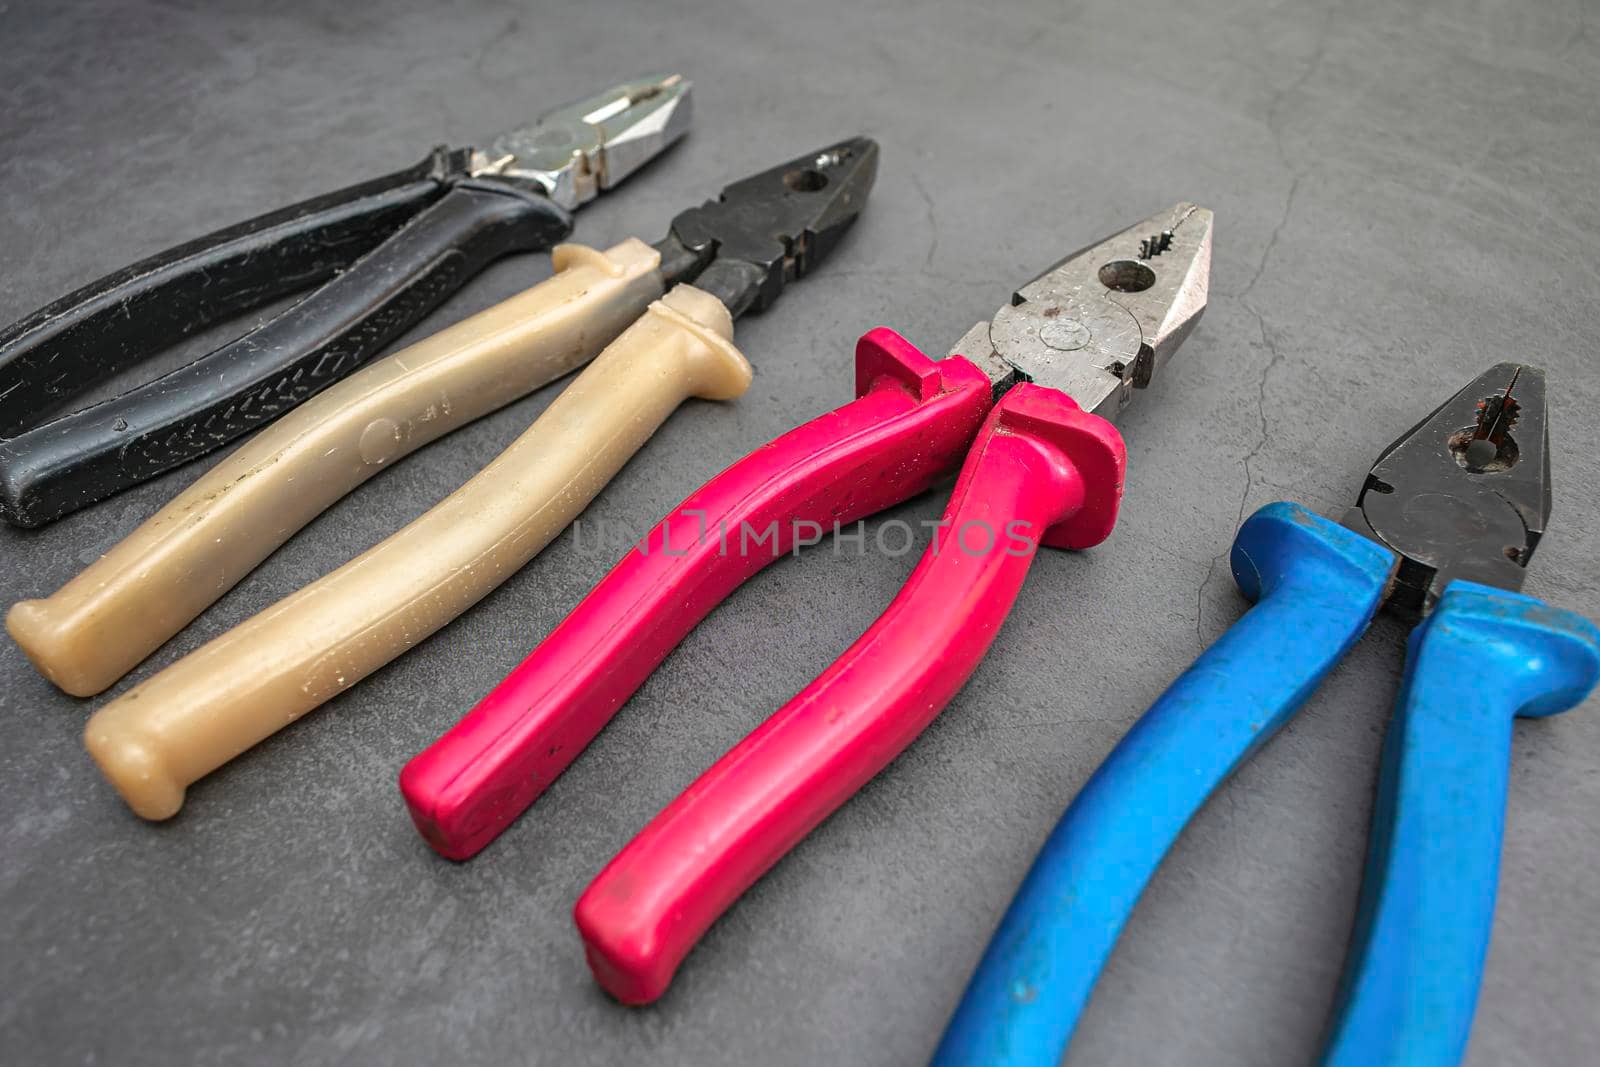 A small set of manual pliers for household repairs by Skaron